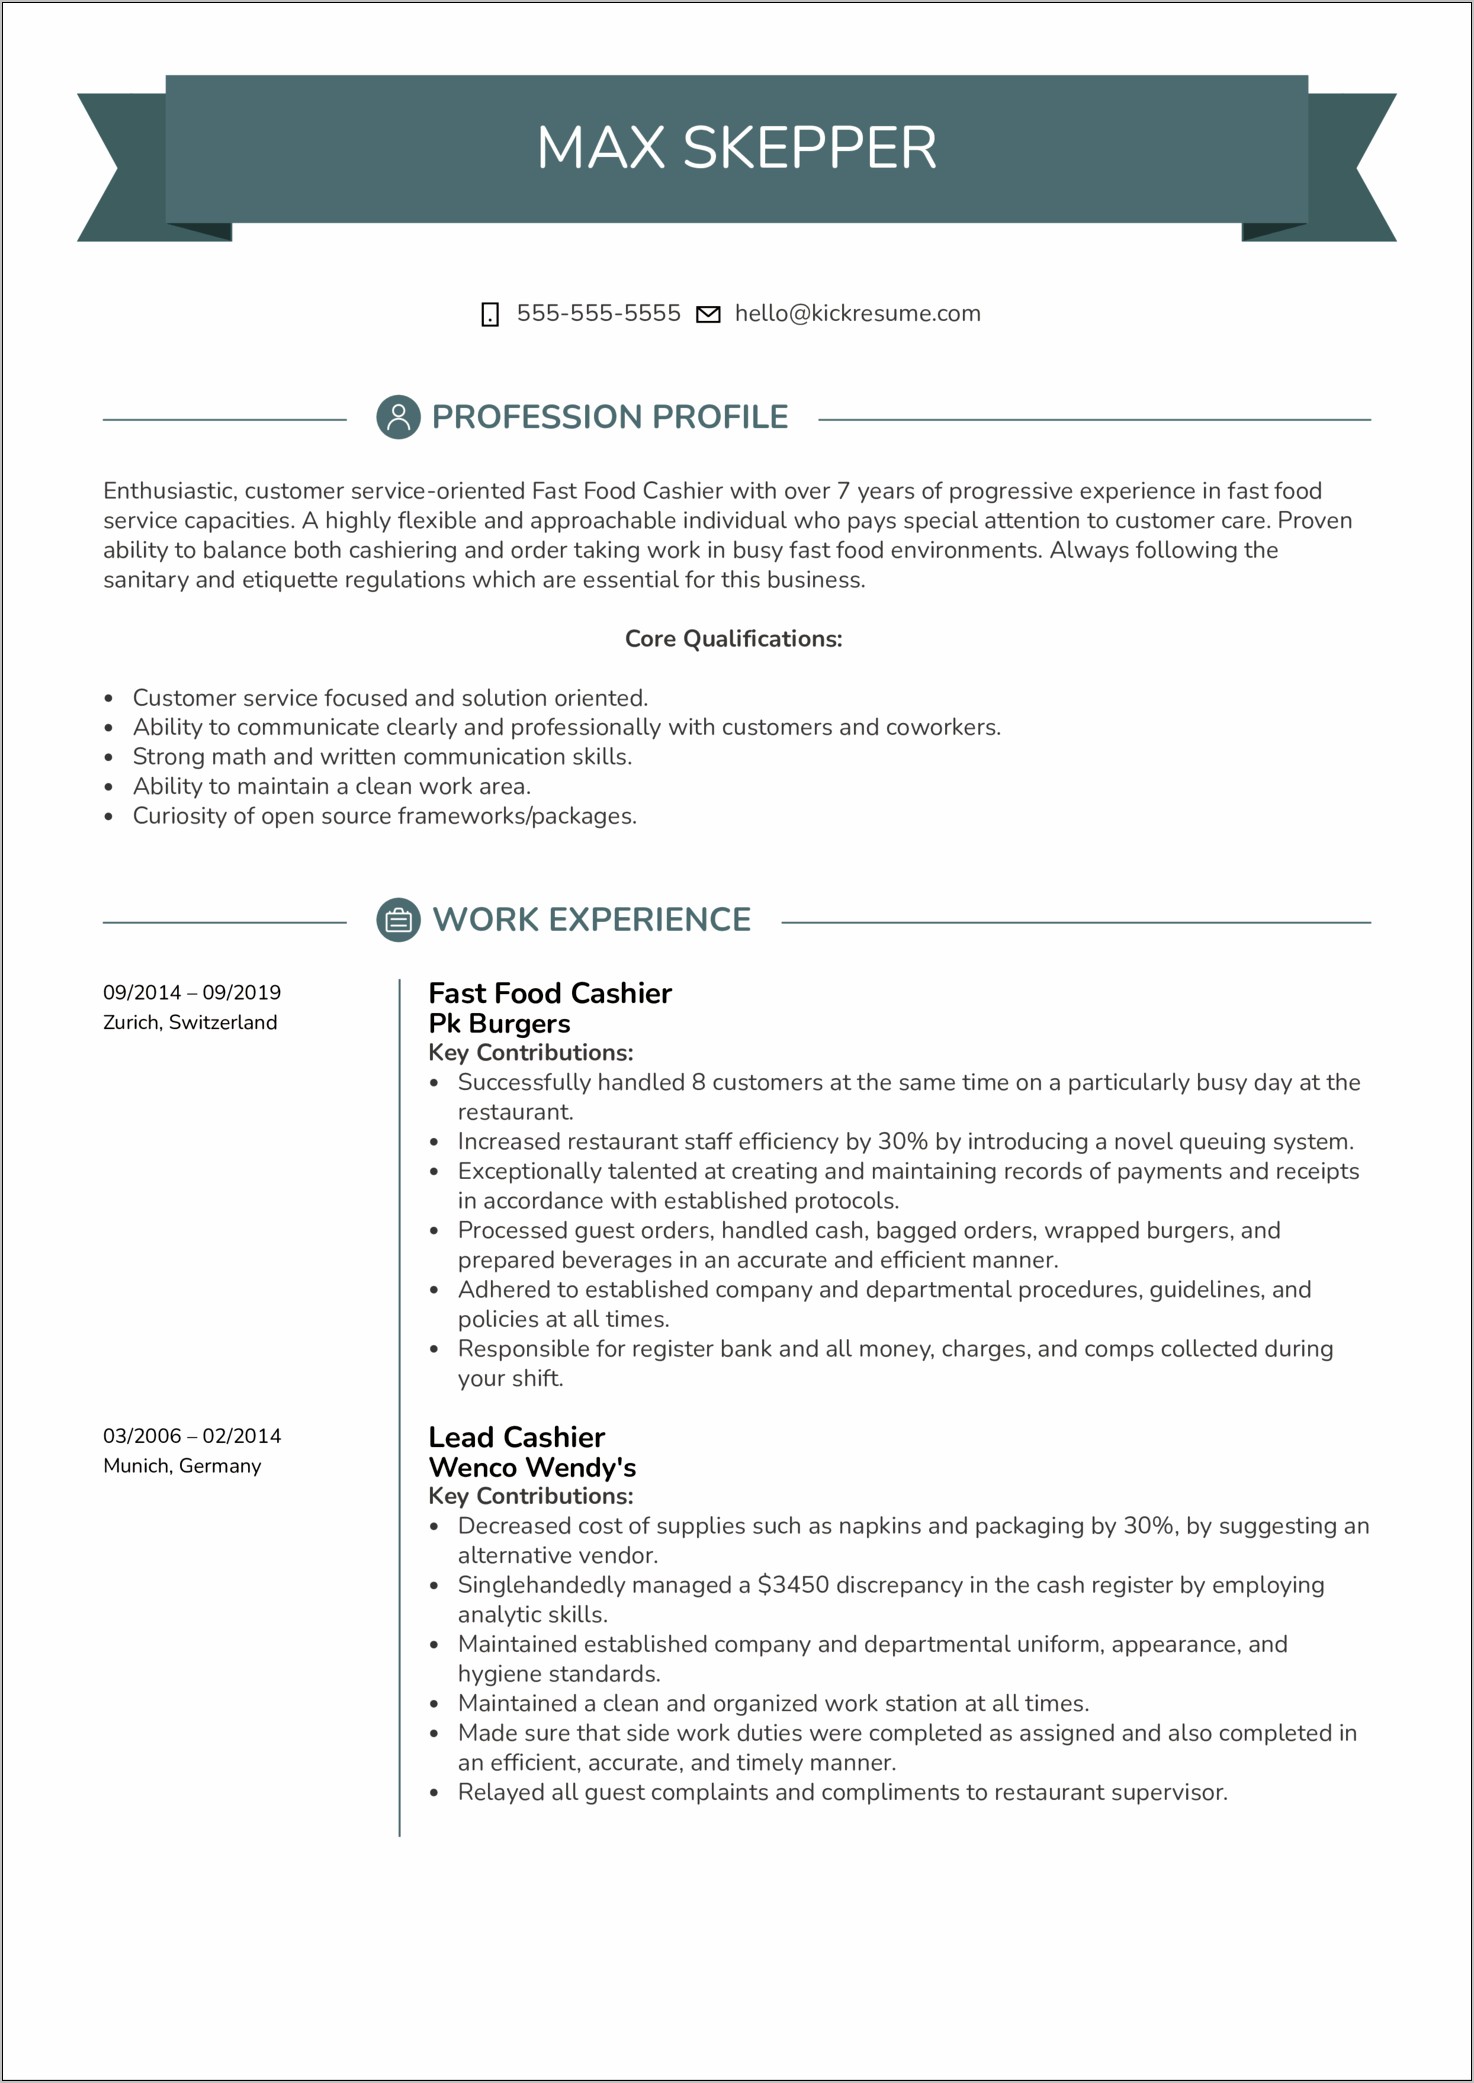 Resume Objective For Fast Food Cashier